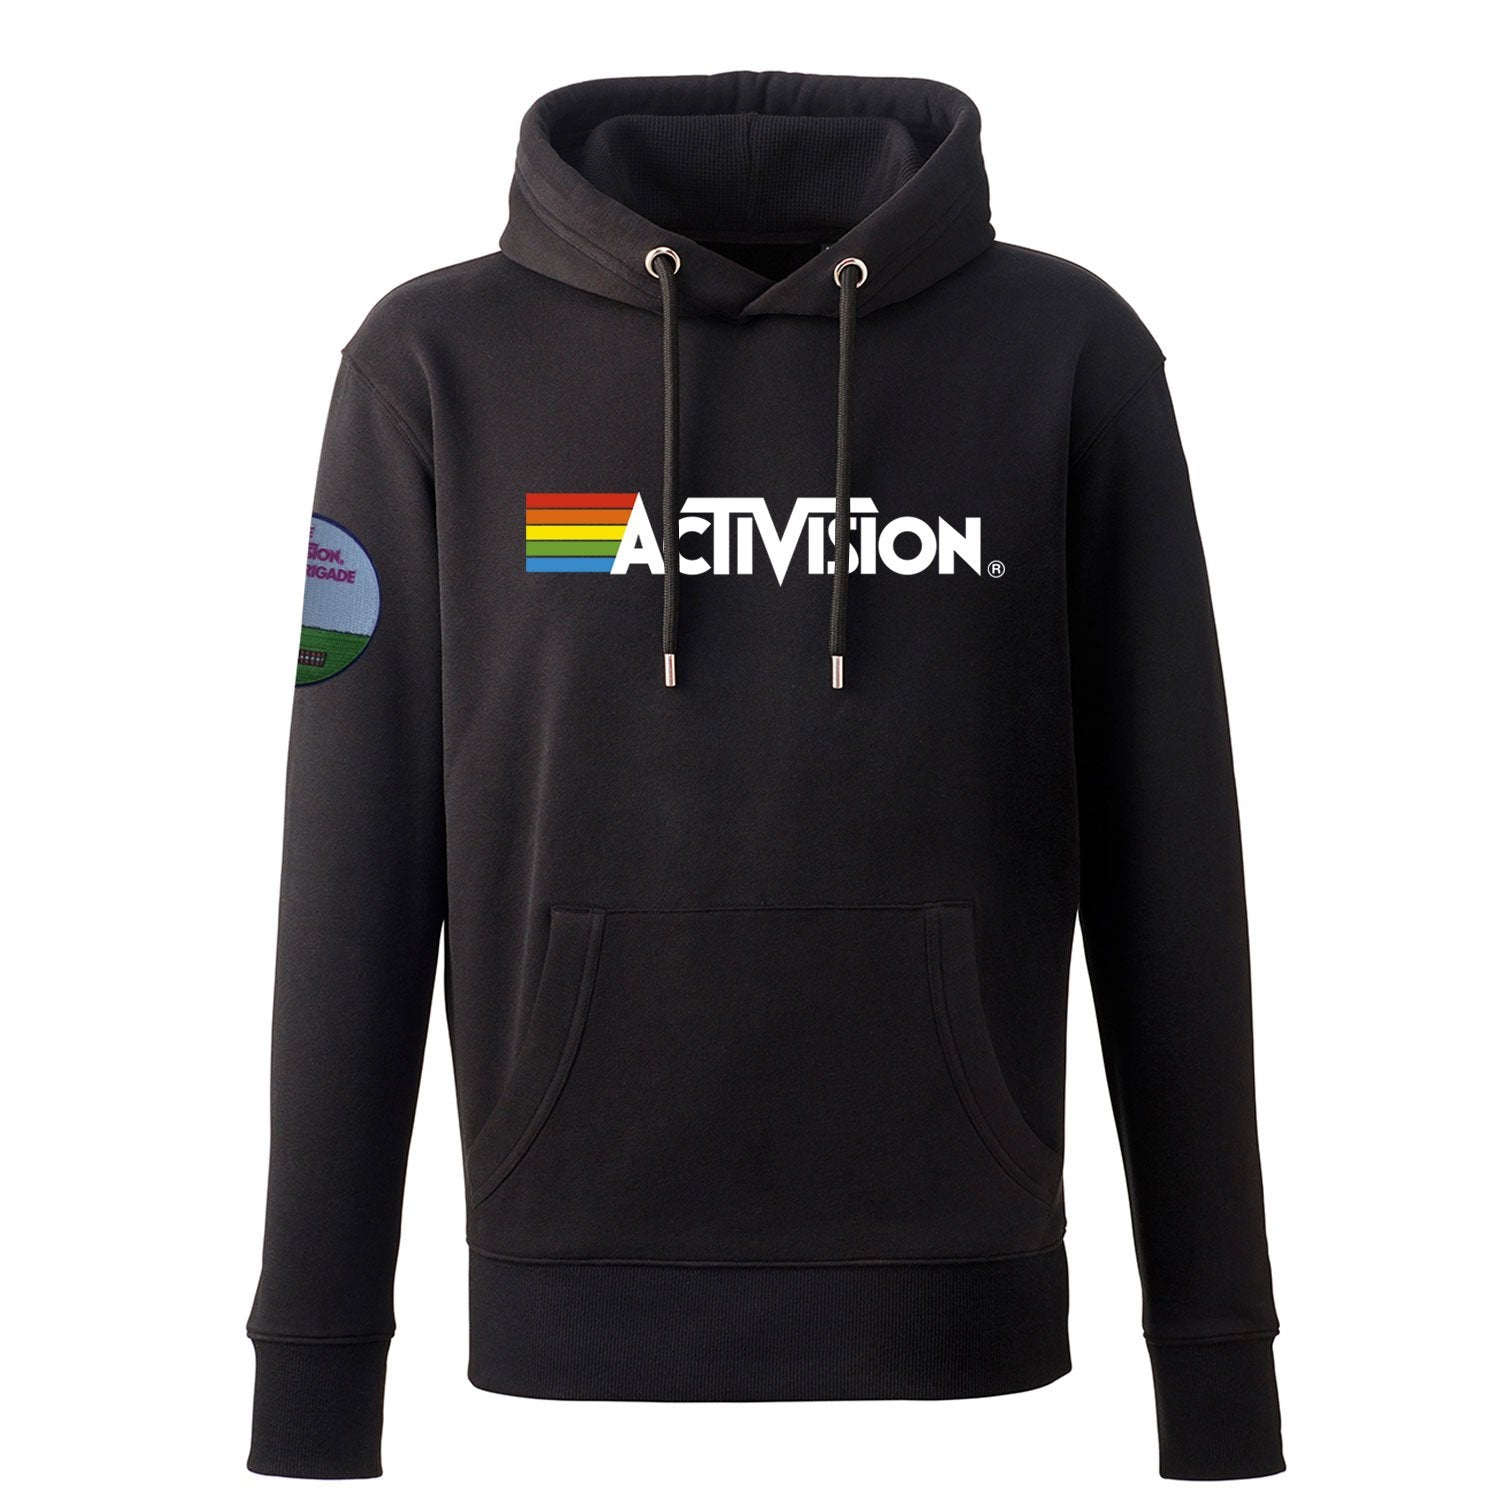 Kaboom Bomb Brigade Patch, Activision Logo Men's Hoody, Black Pullover in Unisex Fit with Kangaroo Pocket